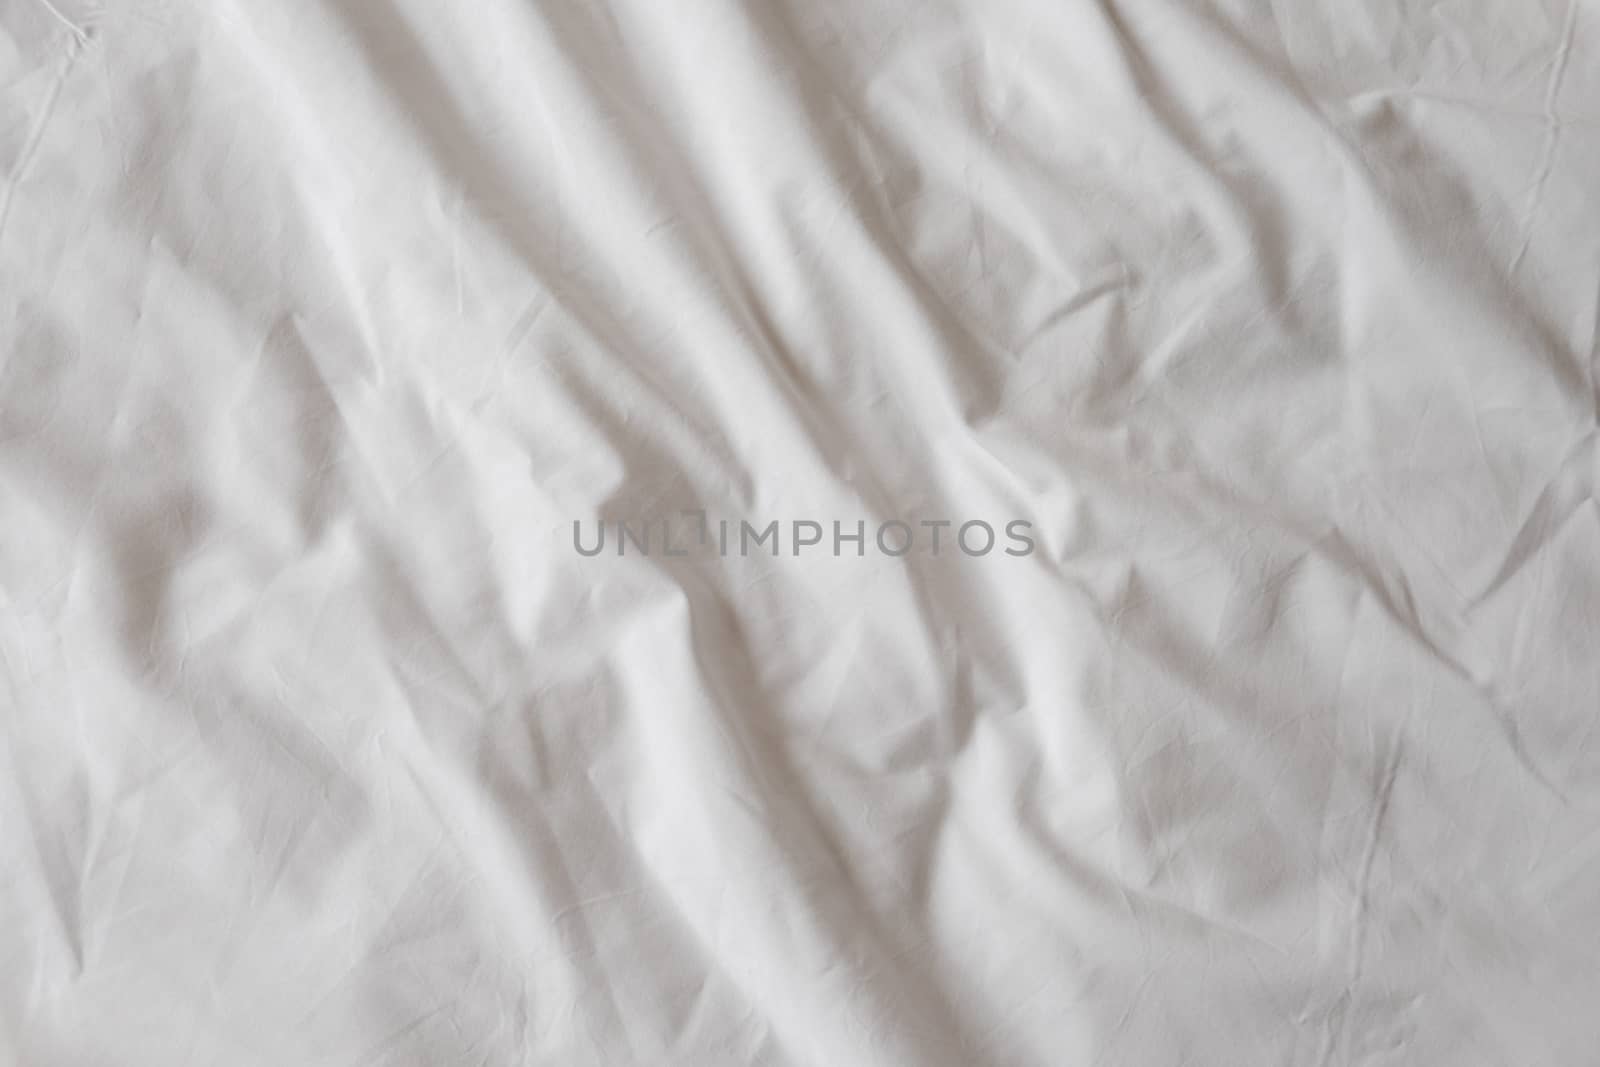 Background of white rumpled sheets. Bed linen with wrinkles in day light. Horizontal. Copy spase. Concept of rest, awakening, sleep. For social media, blog by ALLUNEED